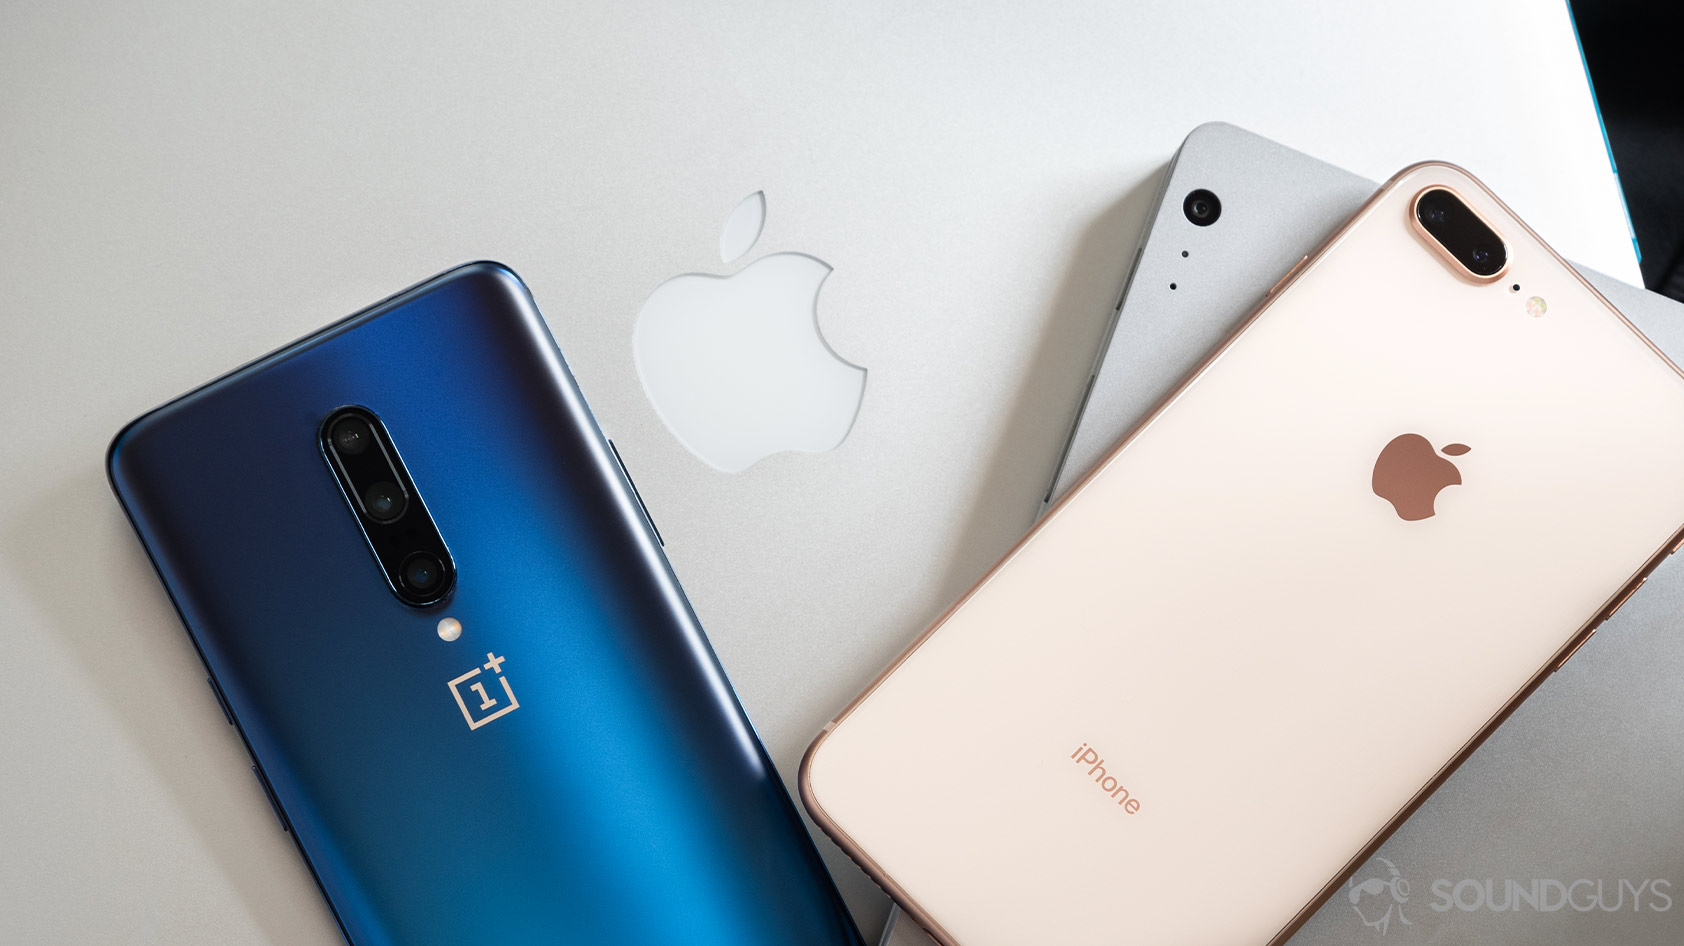 A picture of a OnePlus 7 Pro, iPhone 7 Plus, Macbook Pro, and Surface Book Pro all stacked on top of each other to demonstrate how to use Bluetooth across a range of devices.